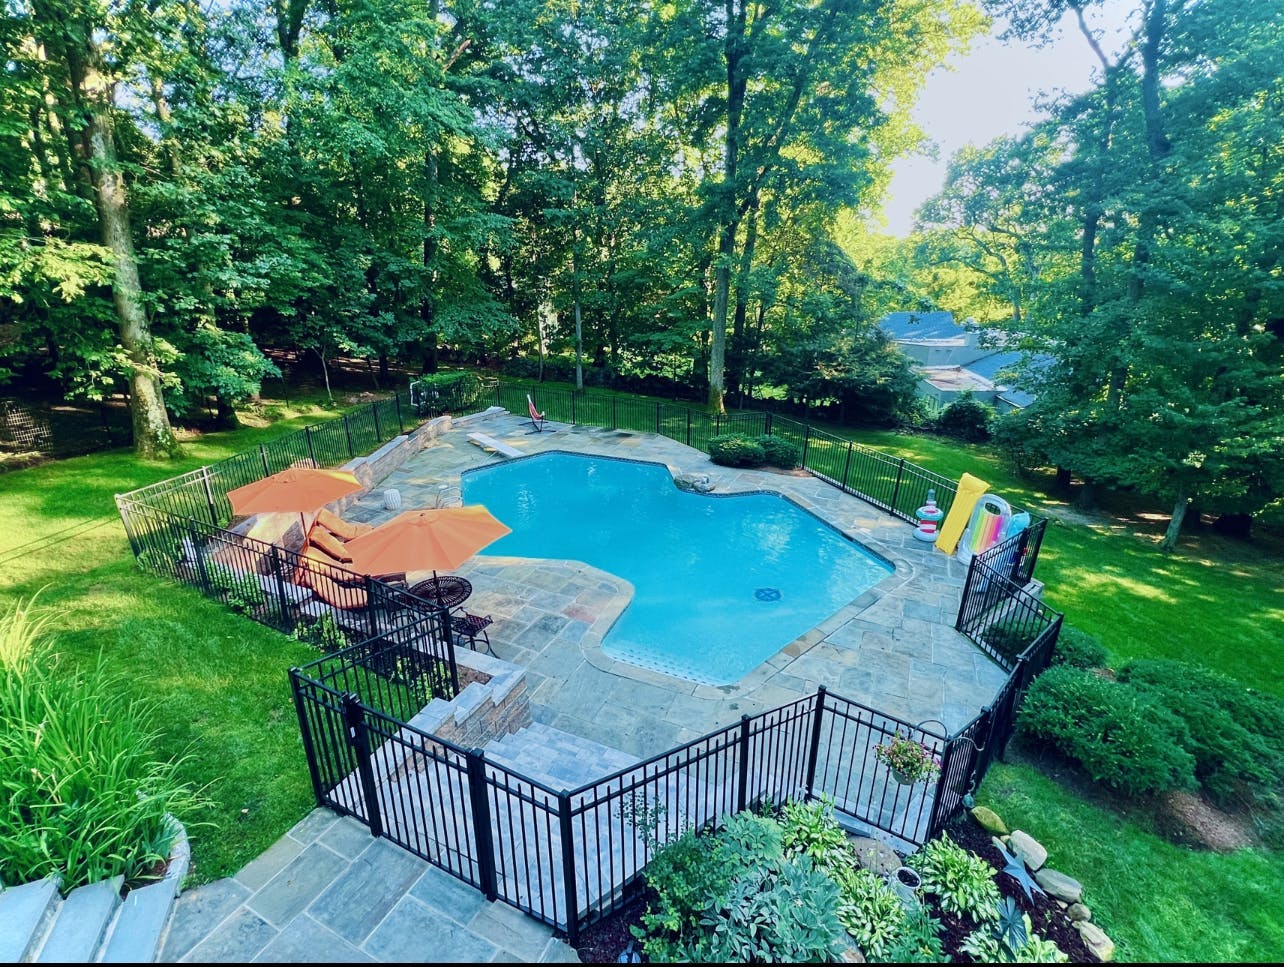 🏊 Dive into Fun in Scarsdale! 🌞